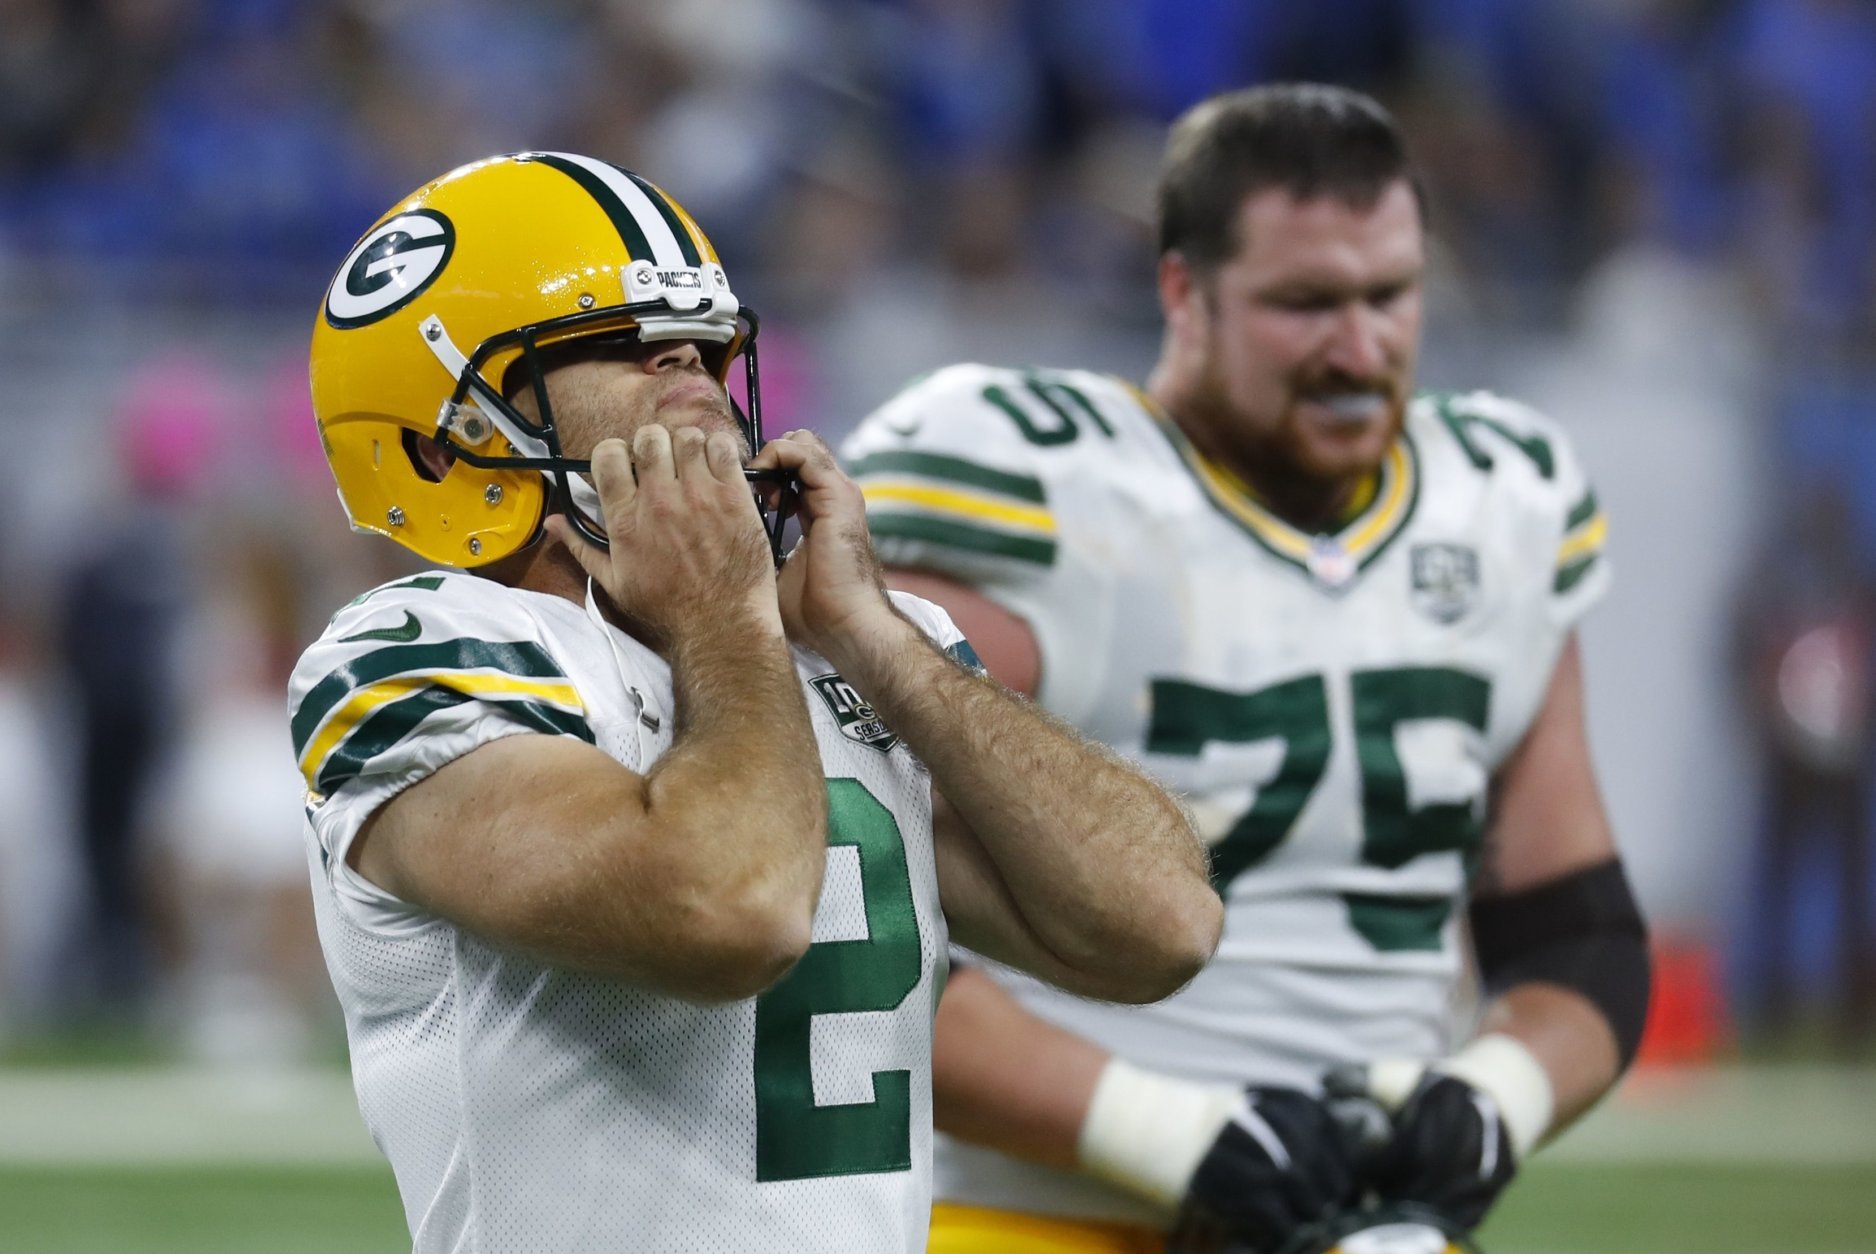 Green Bay Packers kicker Mason Crosby (2) walks off the field after missing his fourth field goal, during the second half of an NFL football game against the Detroit Lions, Sunday, Oct. 7, 2018, in Detroit. (AP Photo/Paul Sancya)